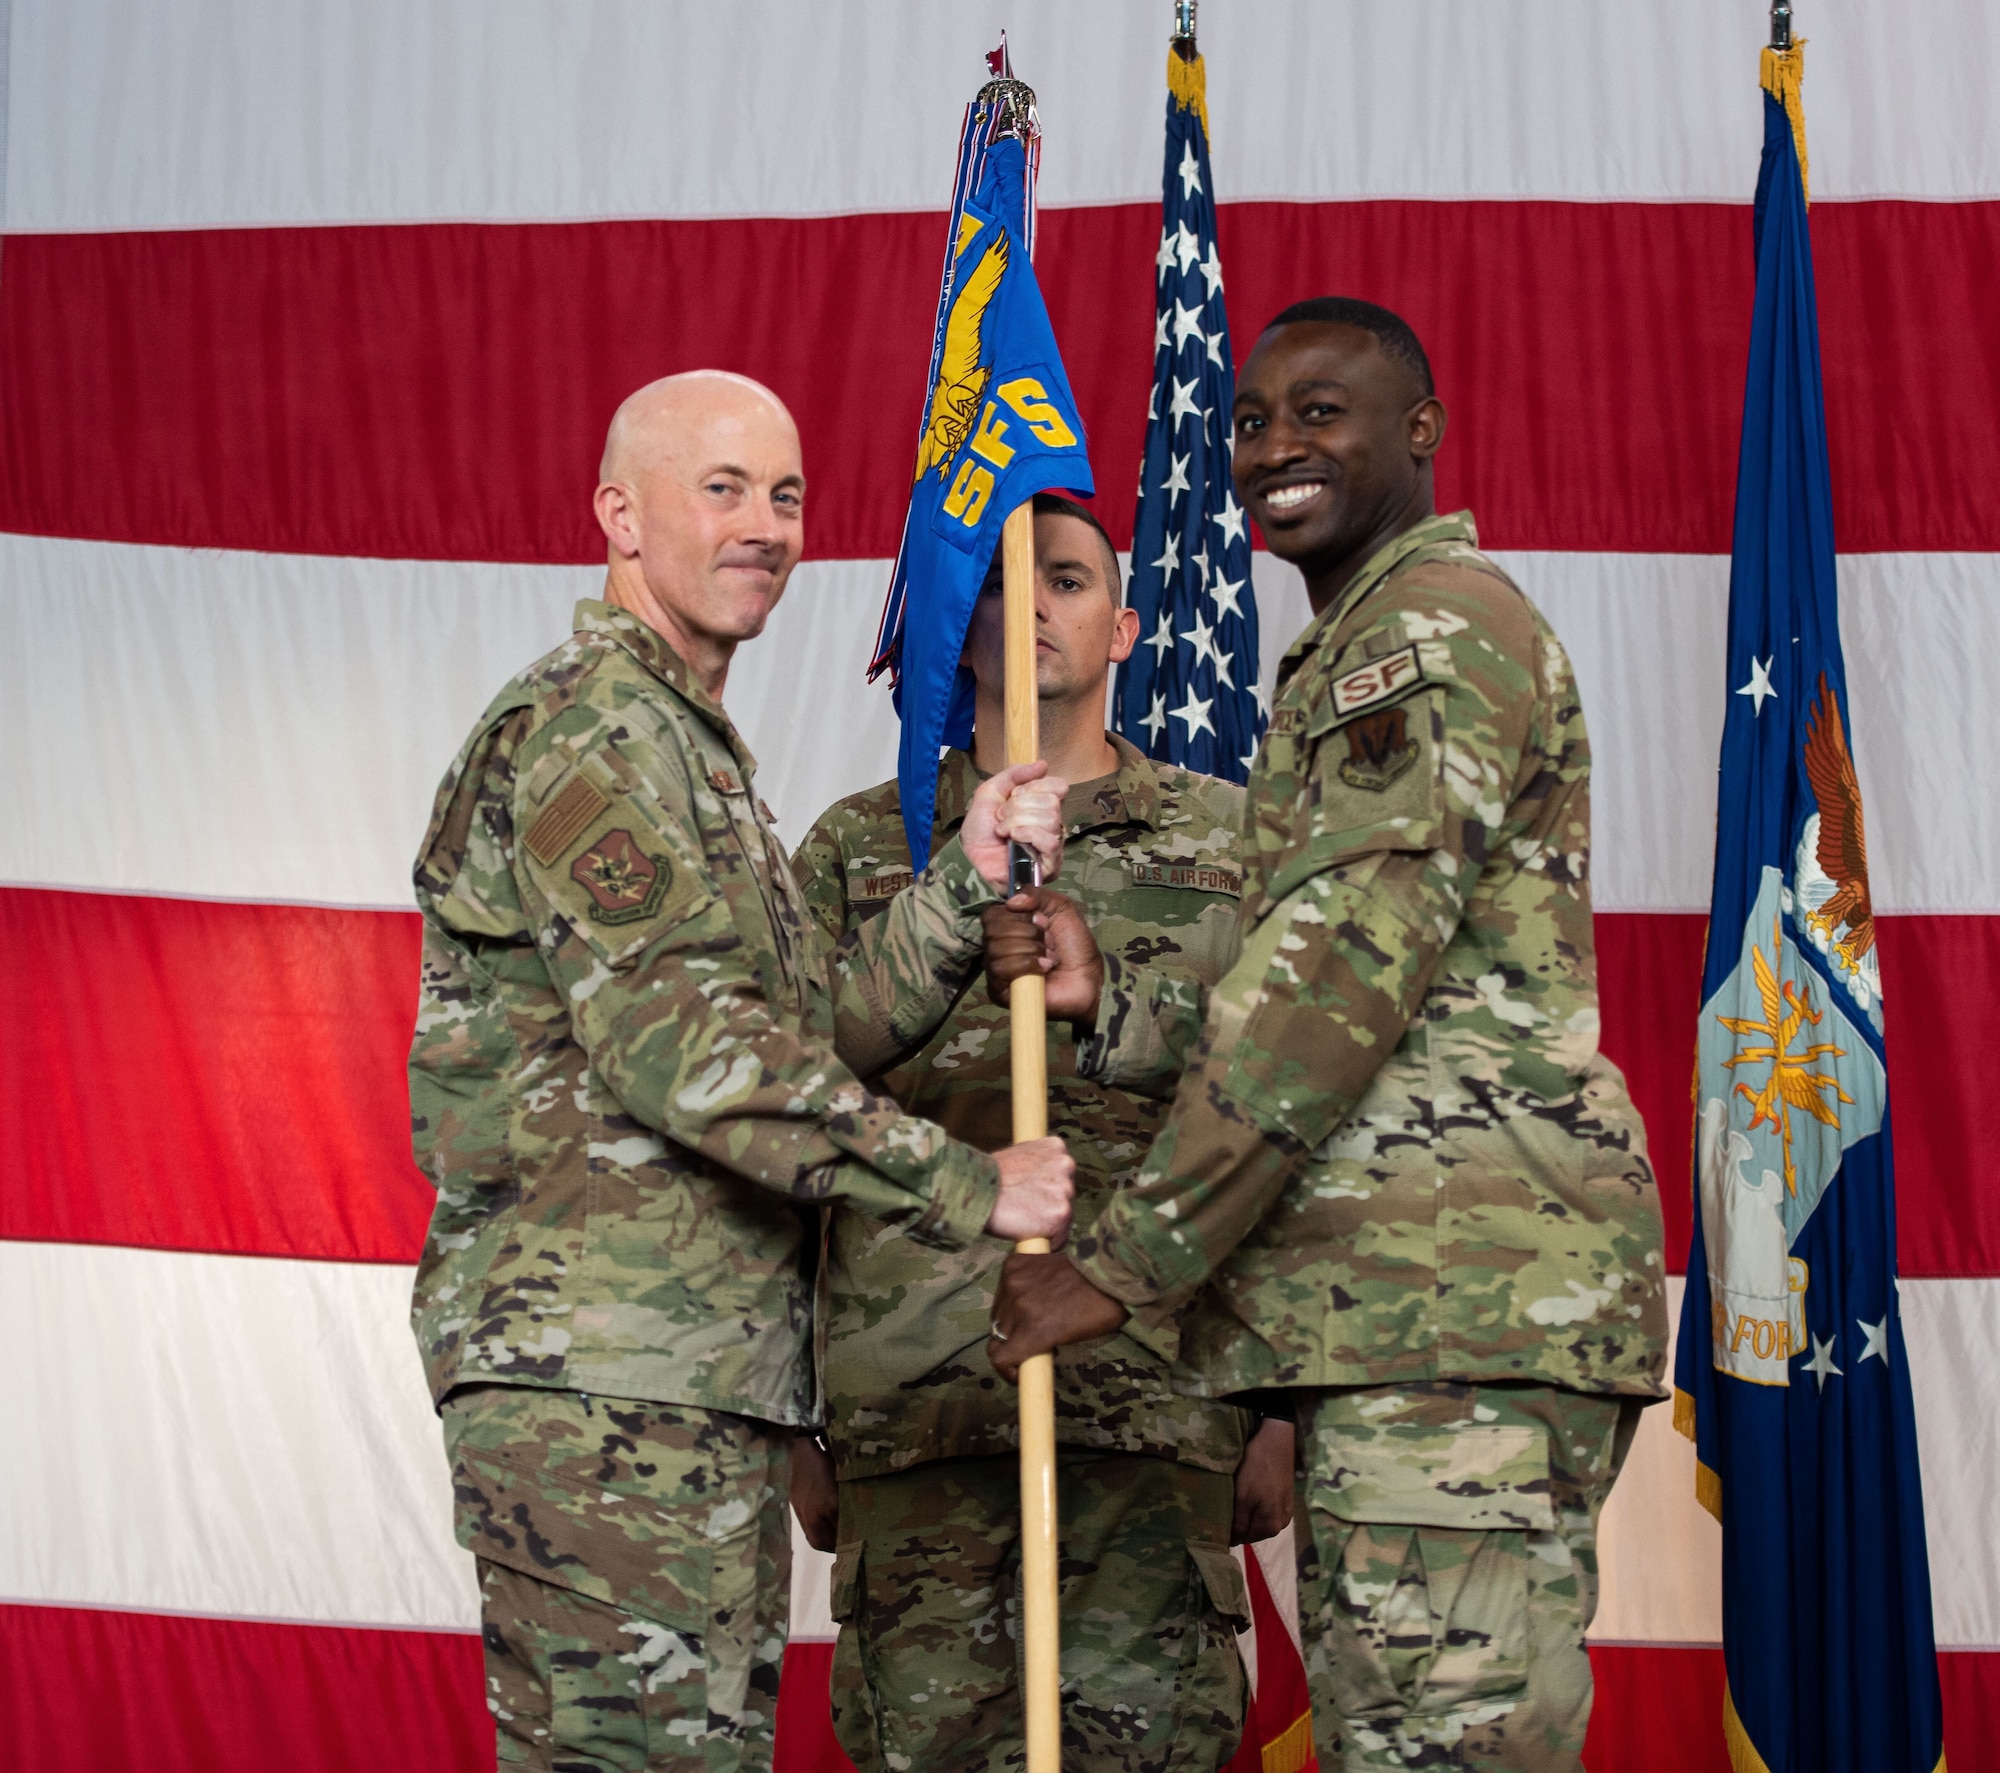 An Air Force colonel passes a guidon over to a new commander